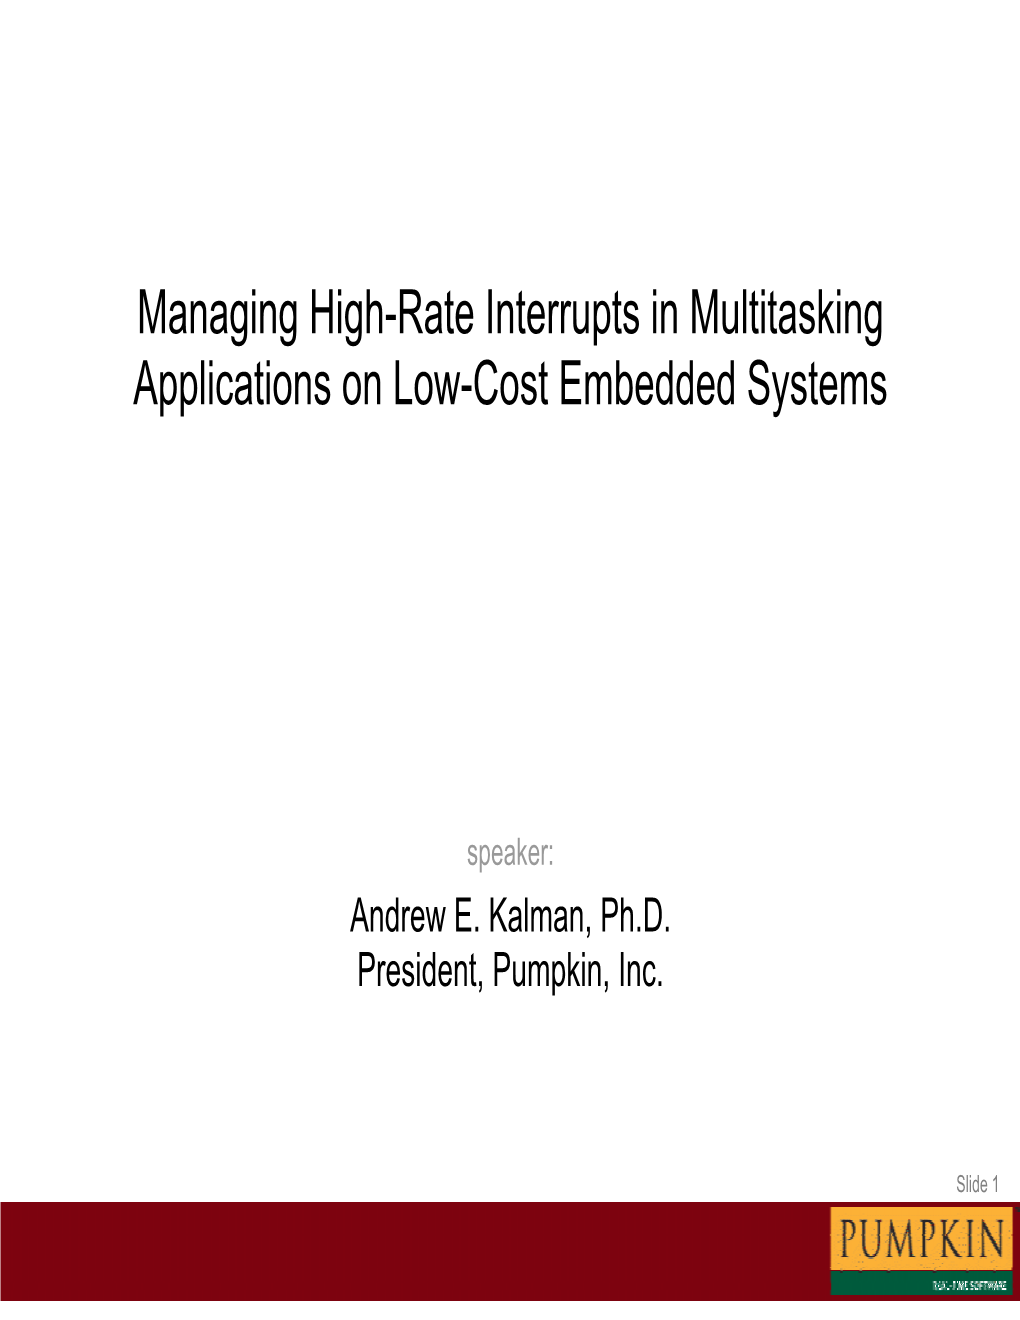 Managing High-Rate Interrupts in Multitasking Applications on Low-Cost Embedded Systems